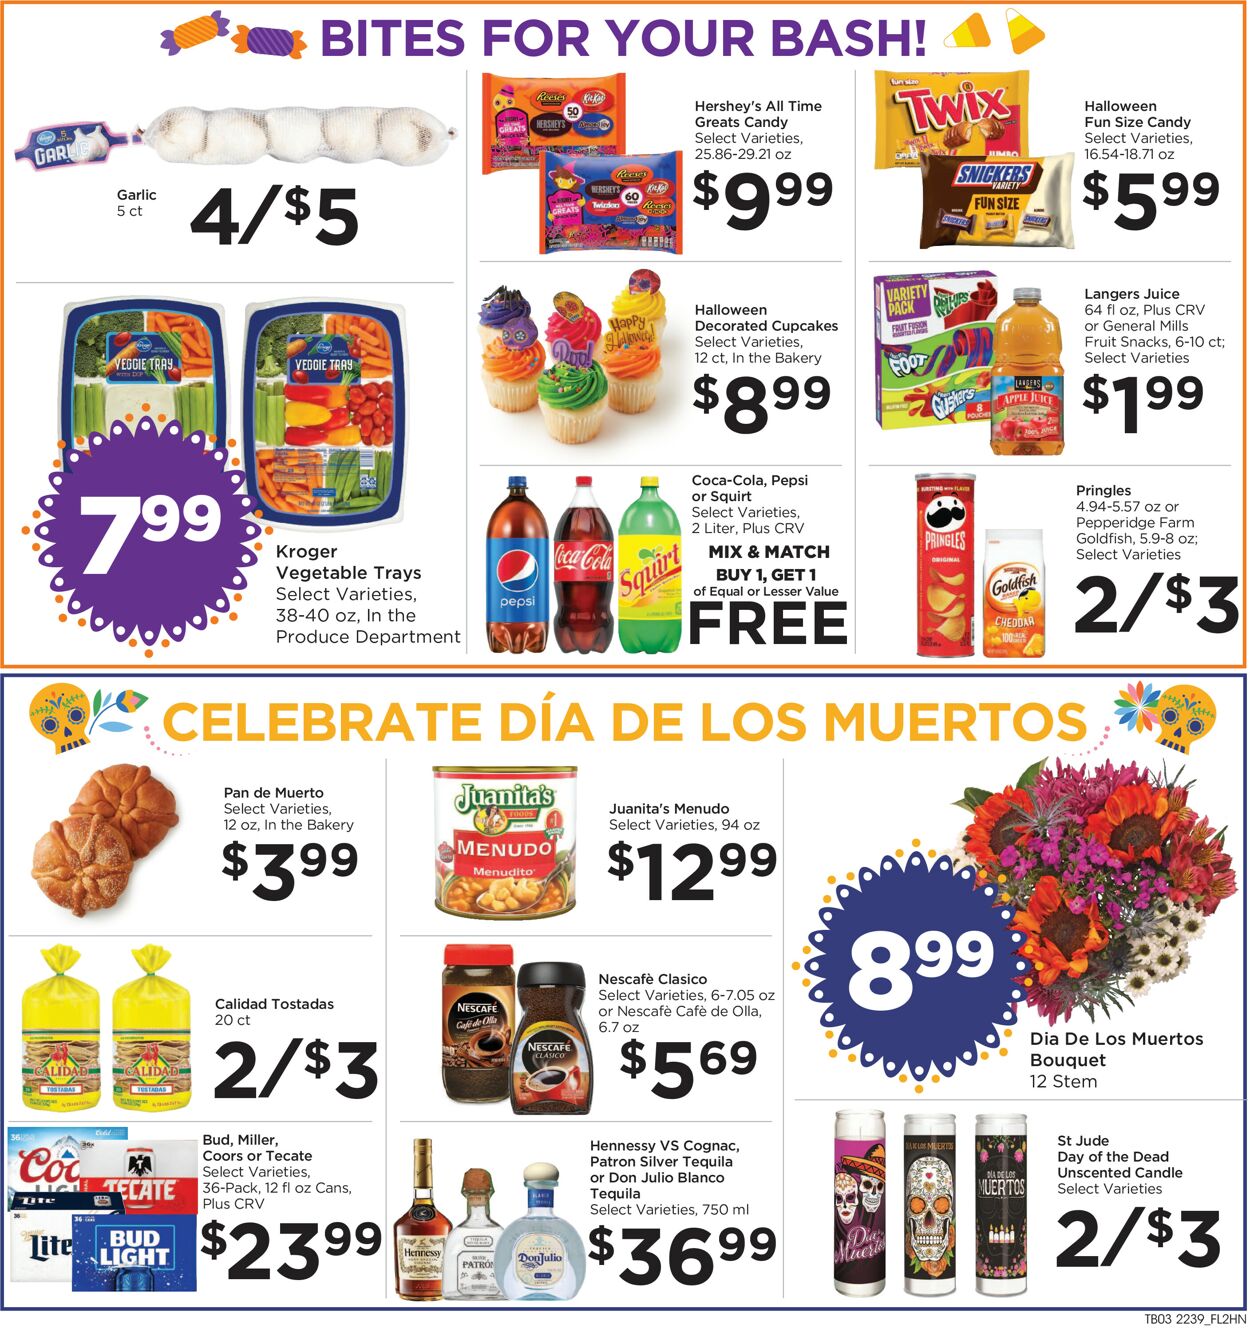 Foods Co. Ad from 10/26/2022